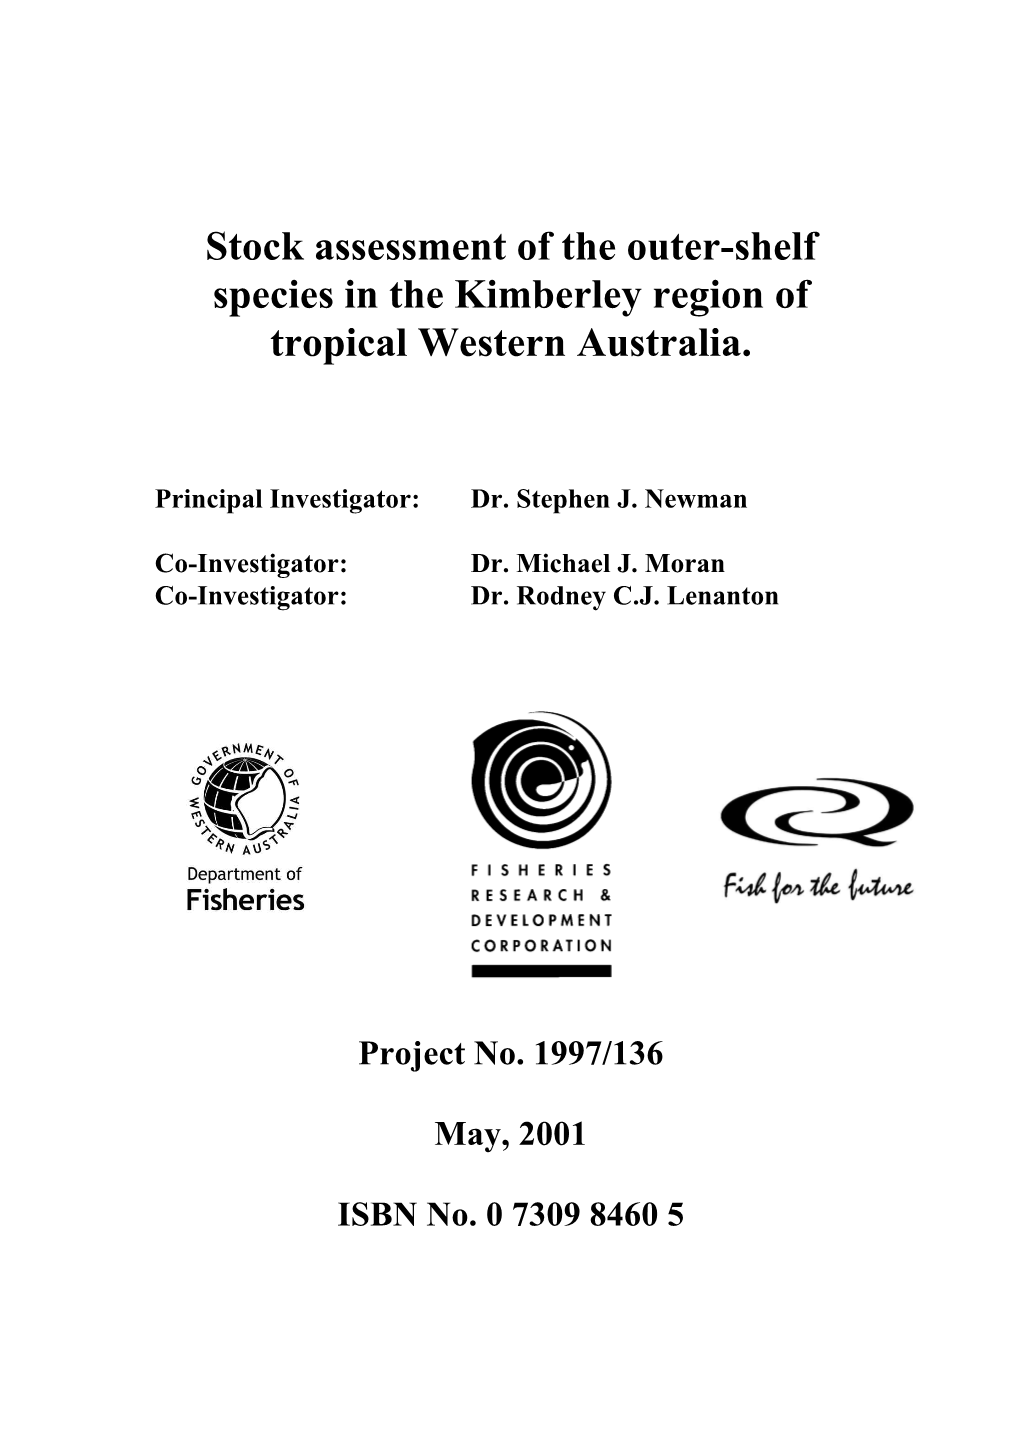 Stock Assessment of the Outer-Shelf Species in the Kimberley Region of Tropical Western Australia